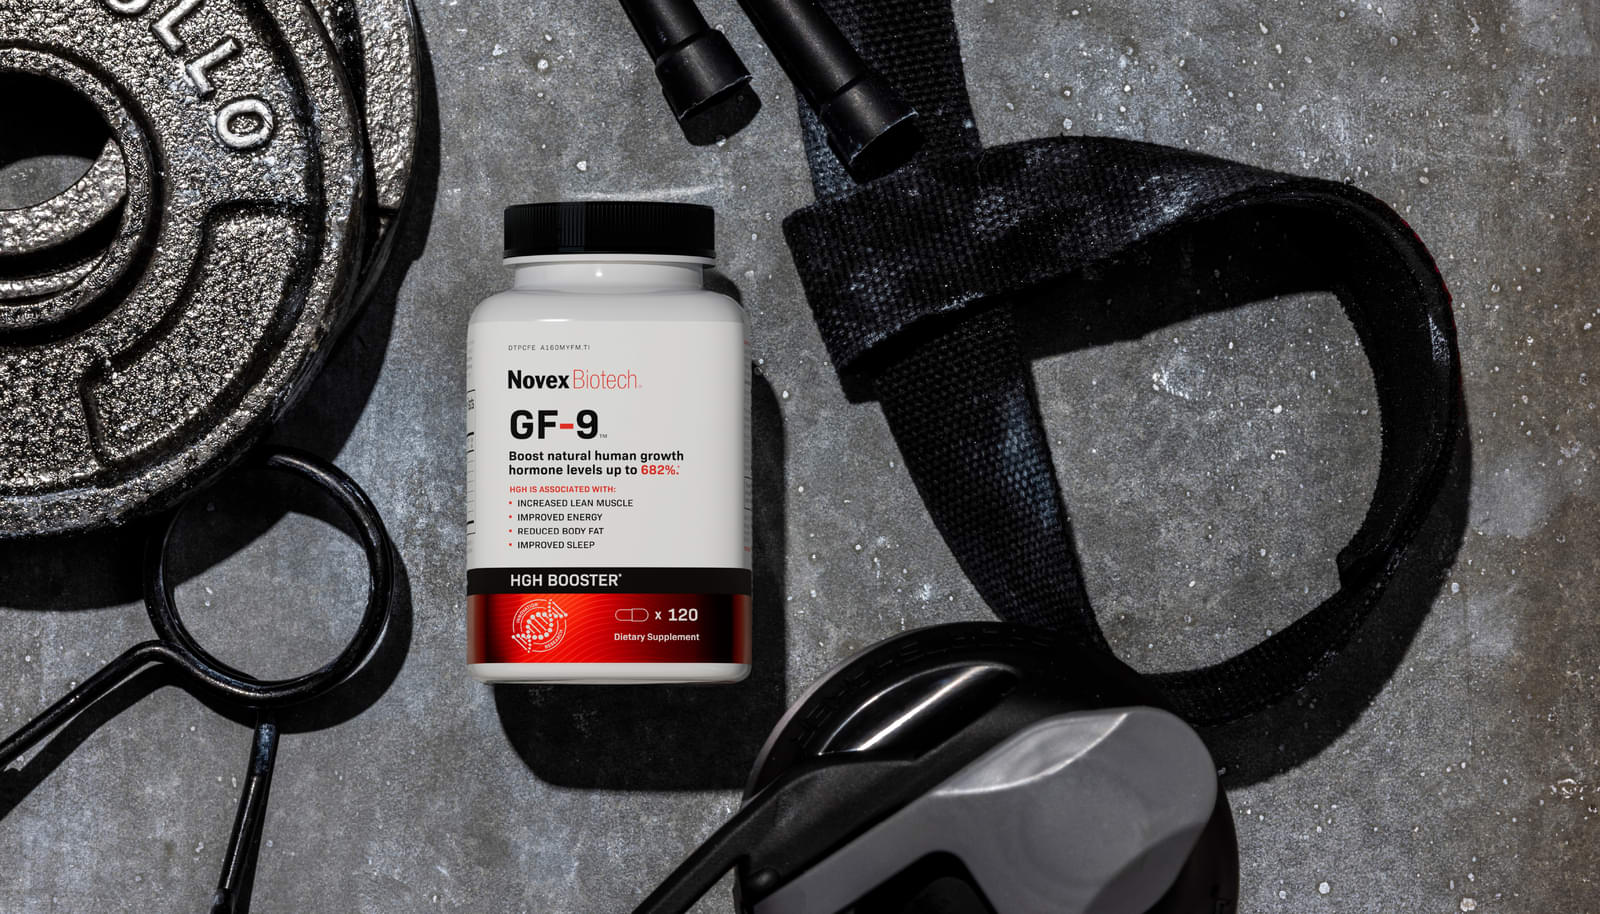 Gf-9 bottle with weightlifting equipment.